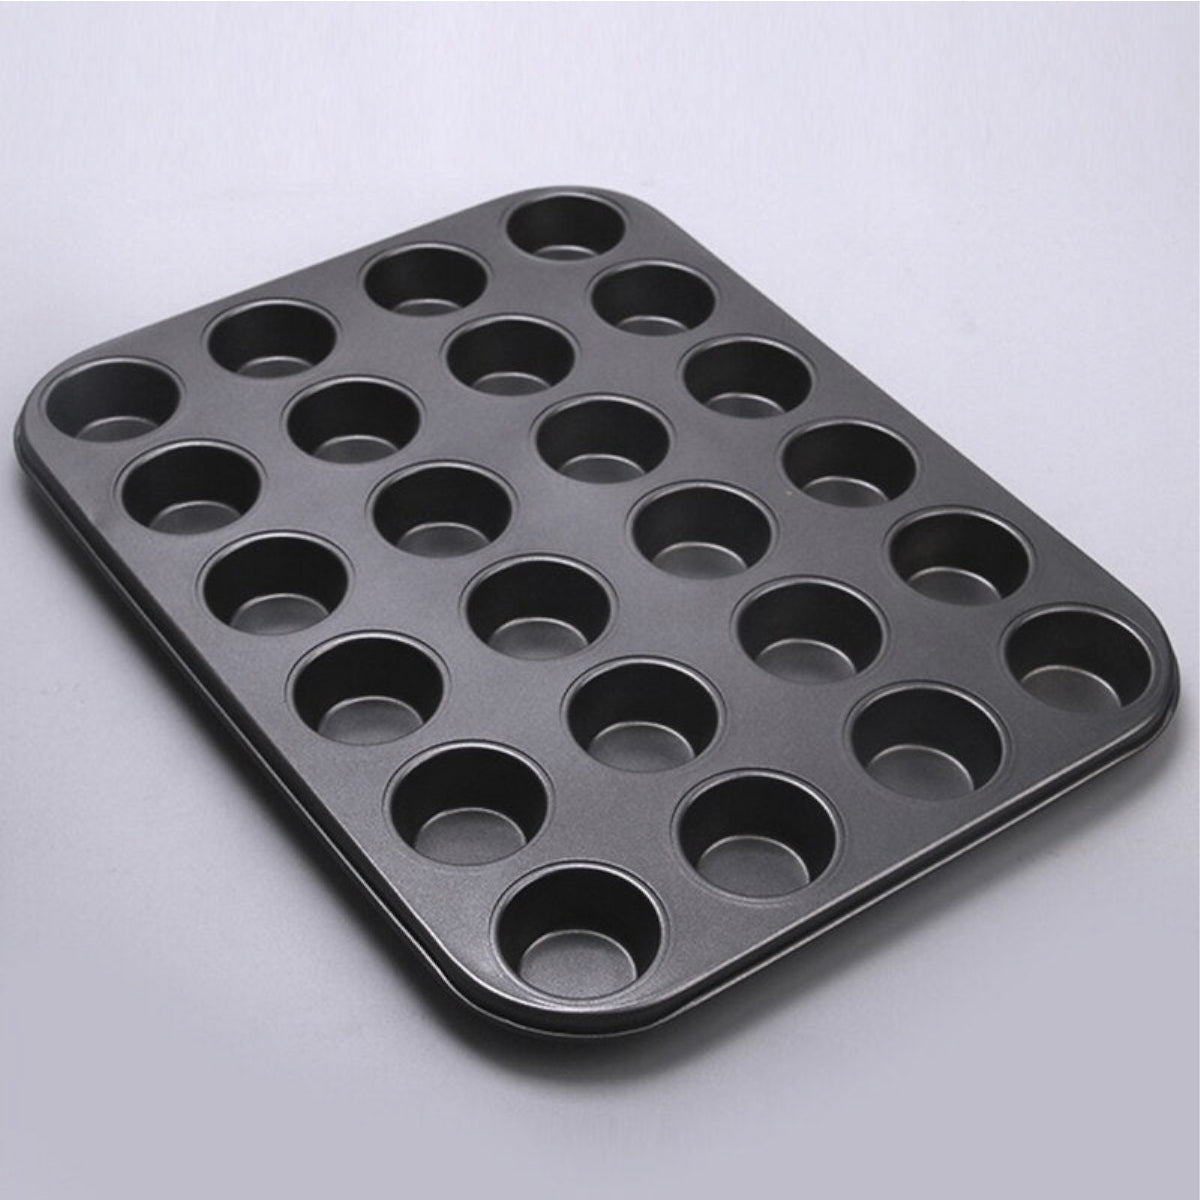 Muffin Baking Molds